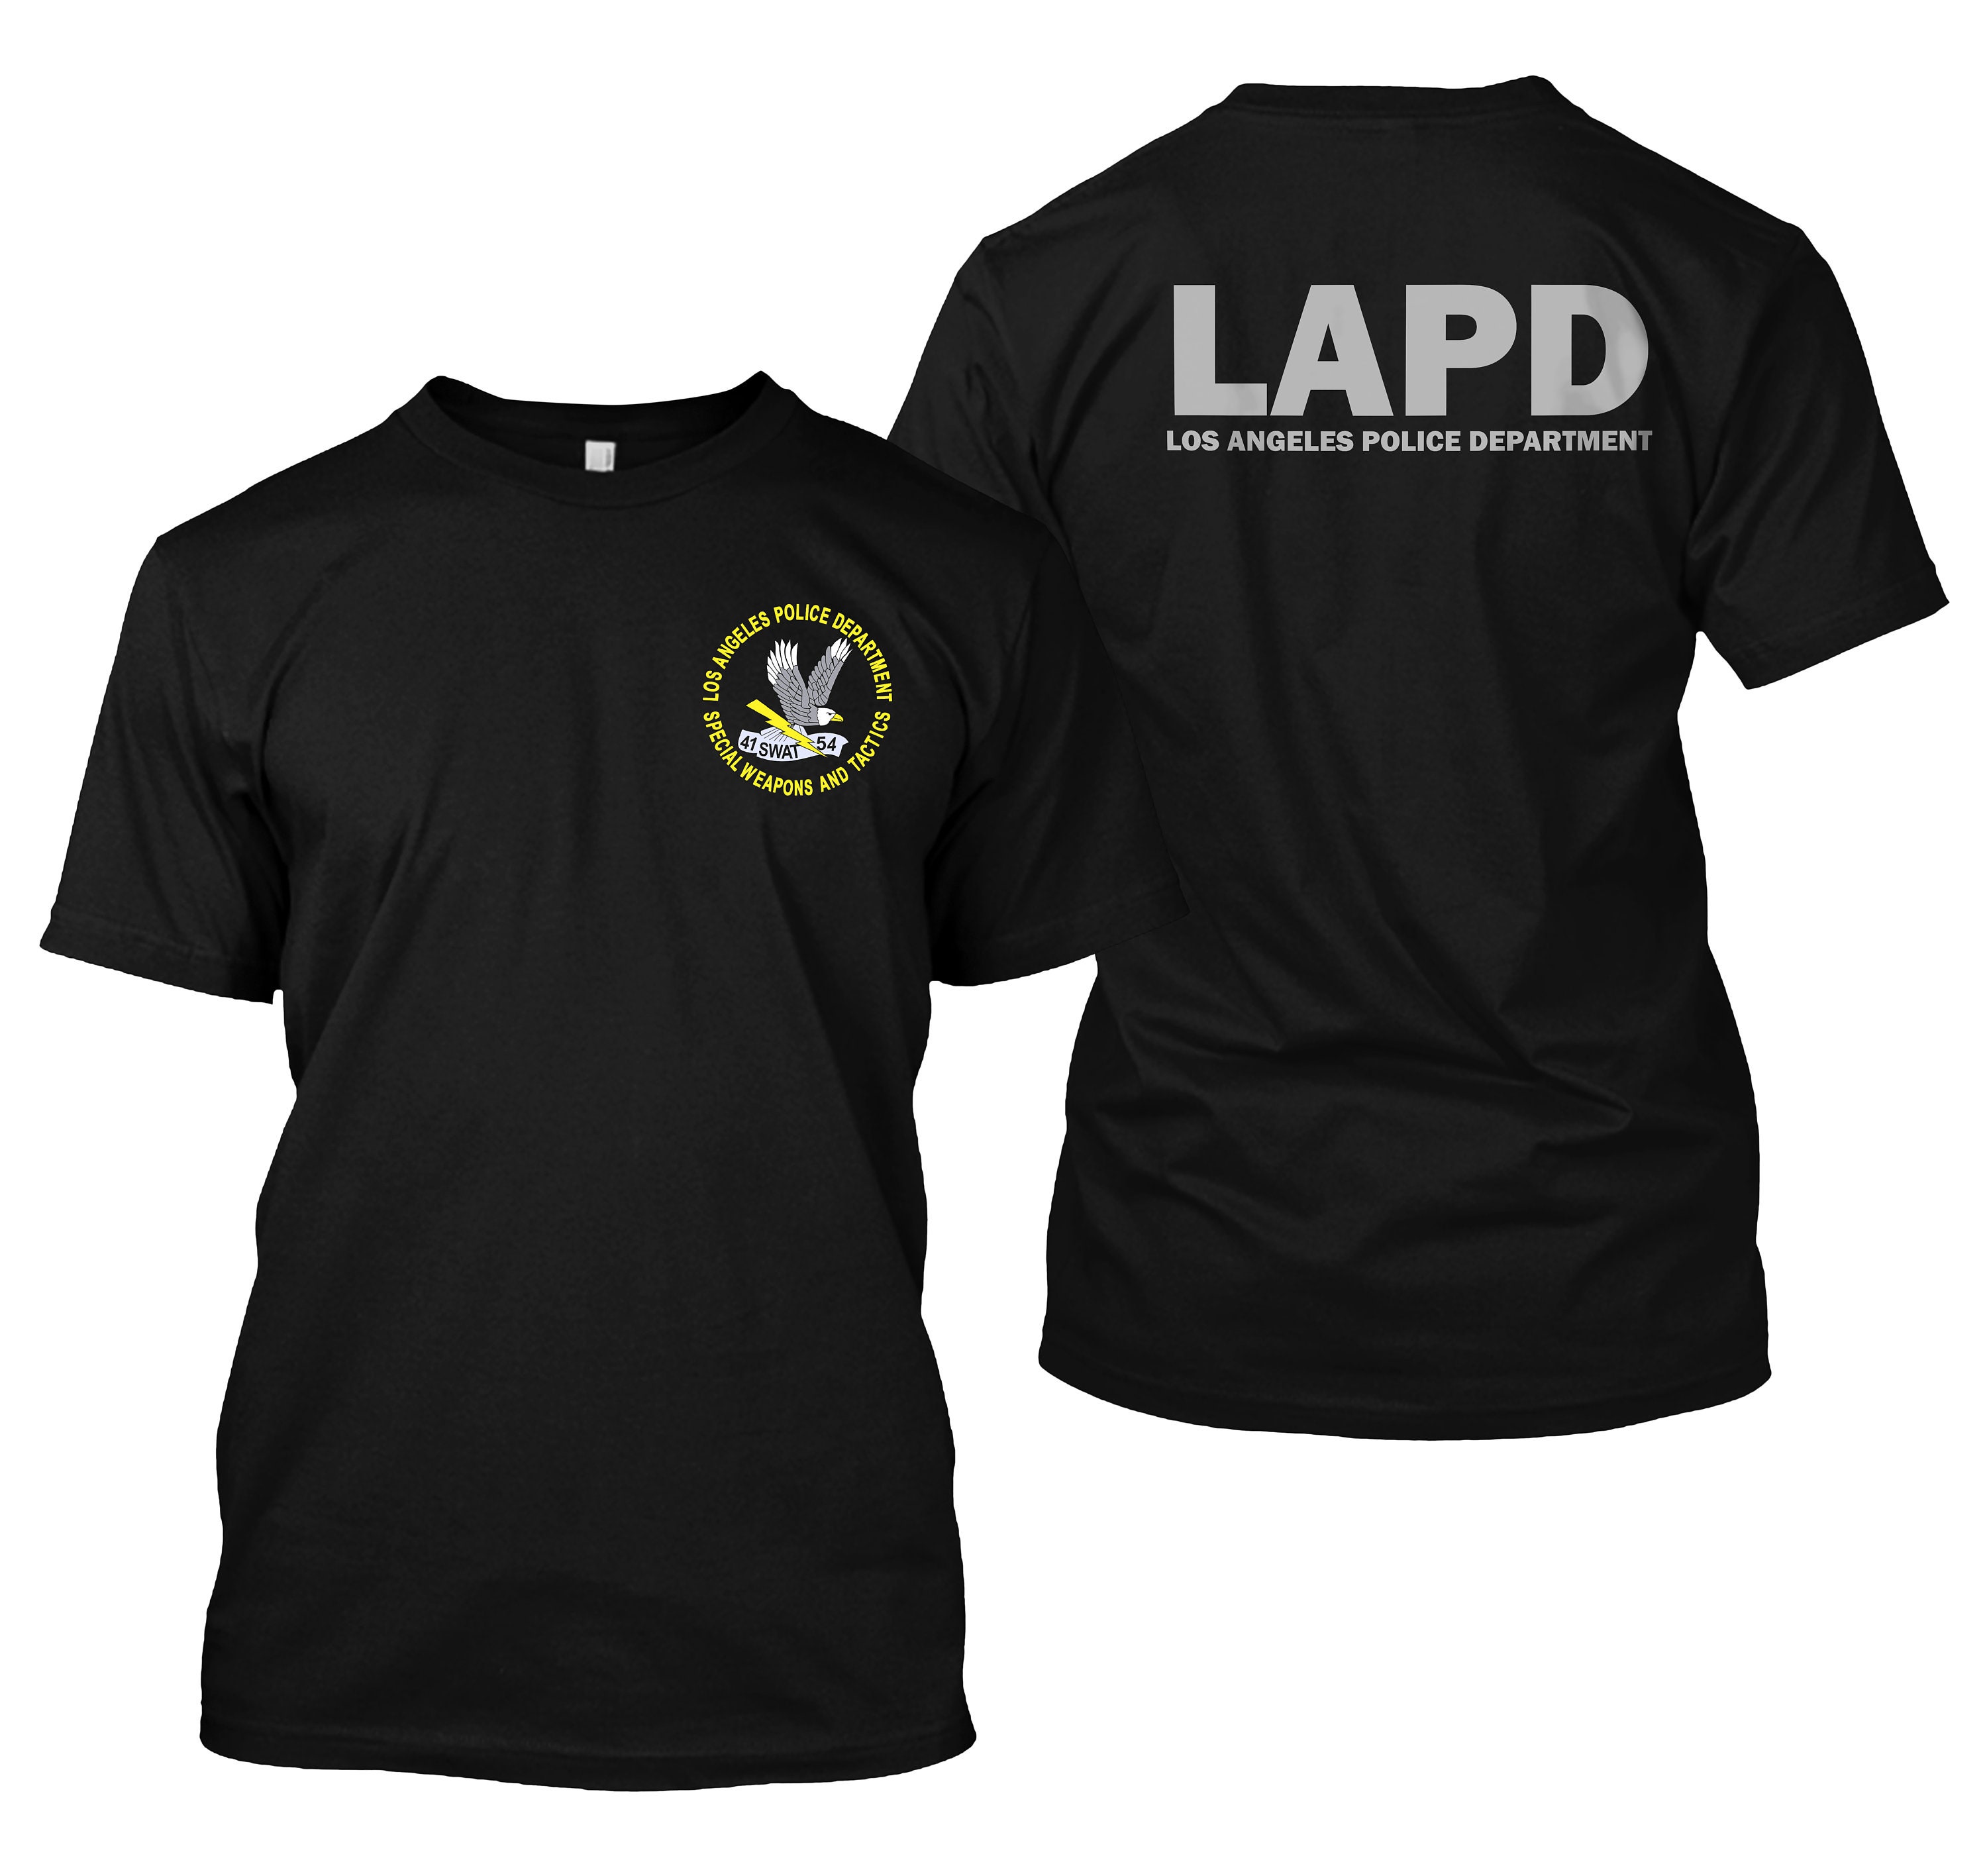 New LAPD Los Angeles SWAT Police Double sided tshirt